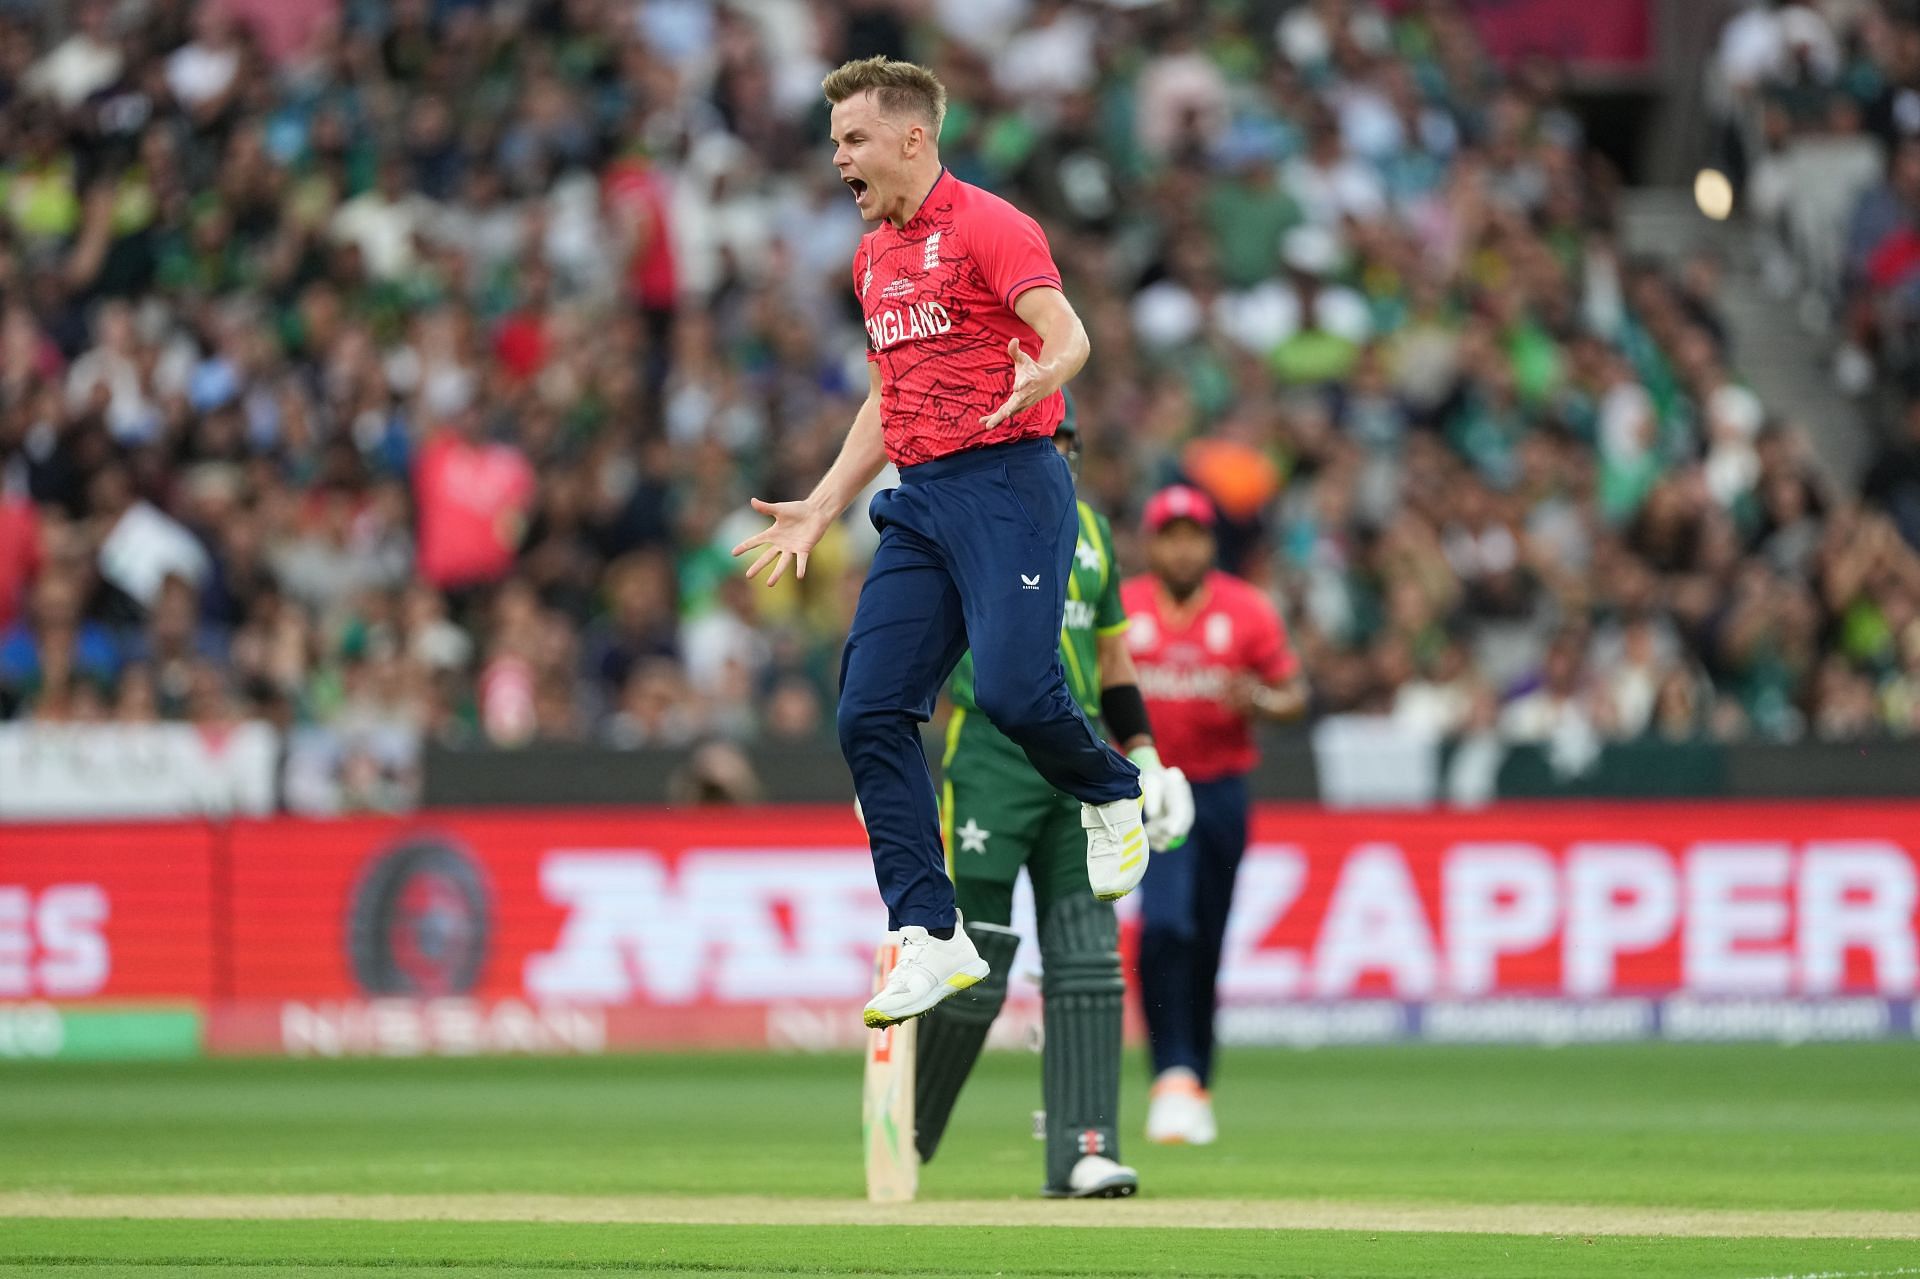 Sam Curran bowled an exceptional spell in the T20 World Cup final.